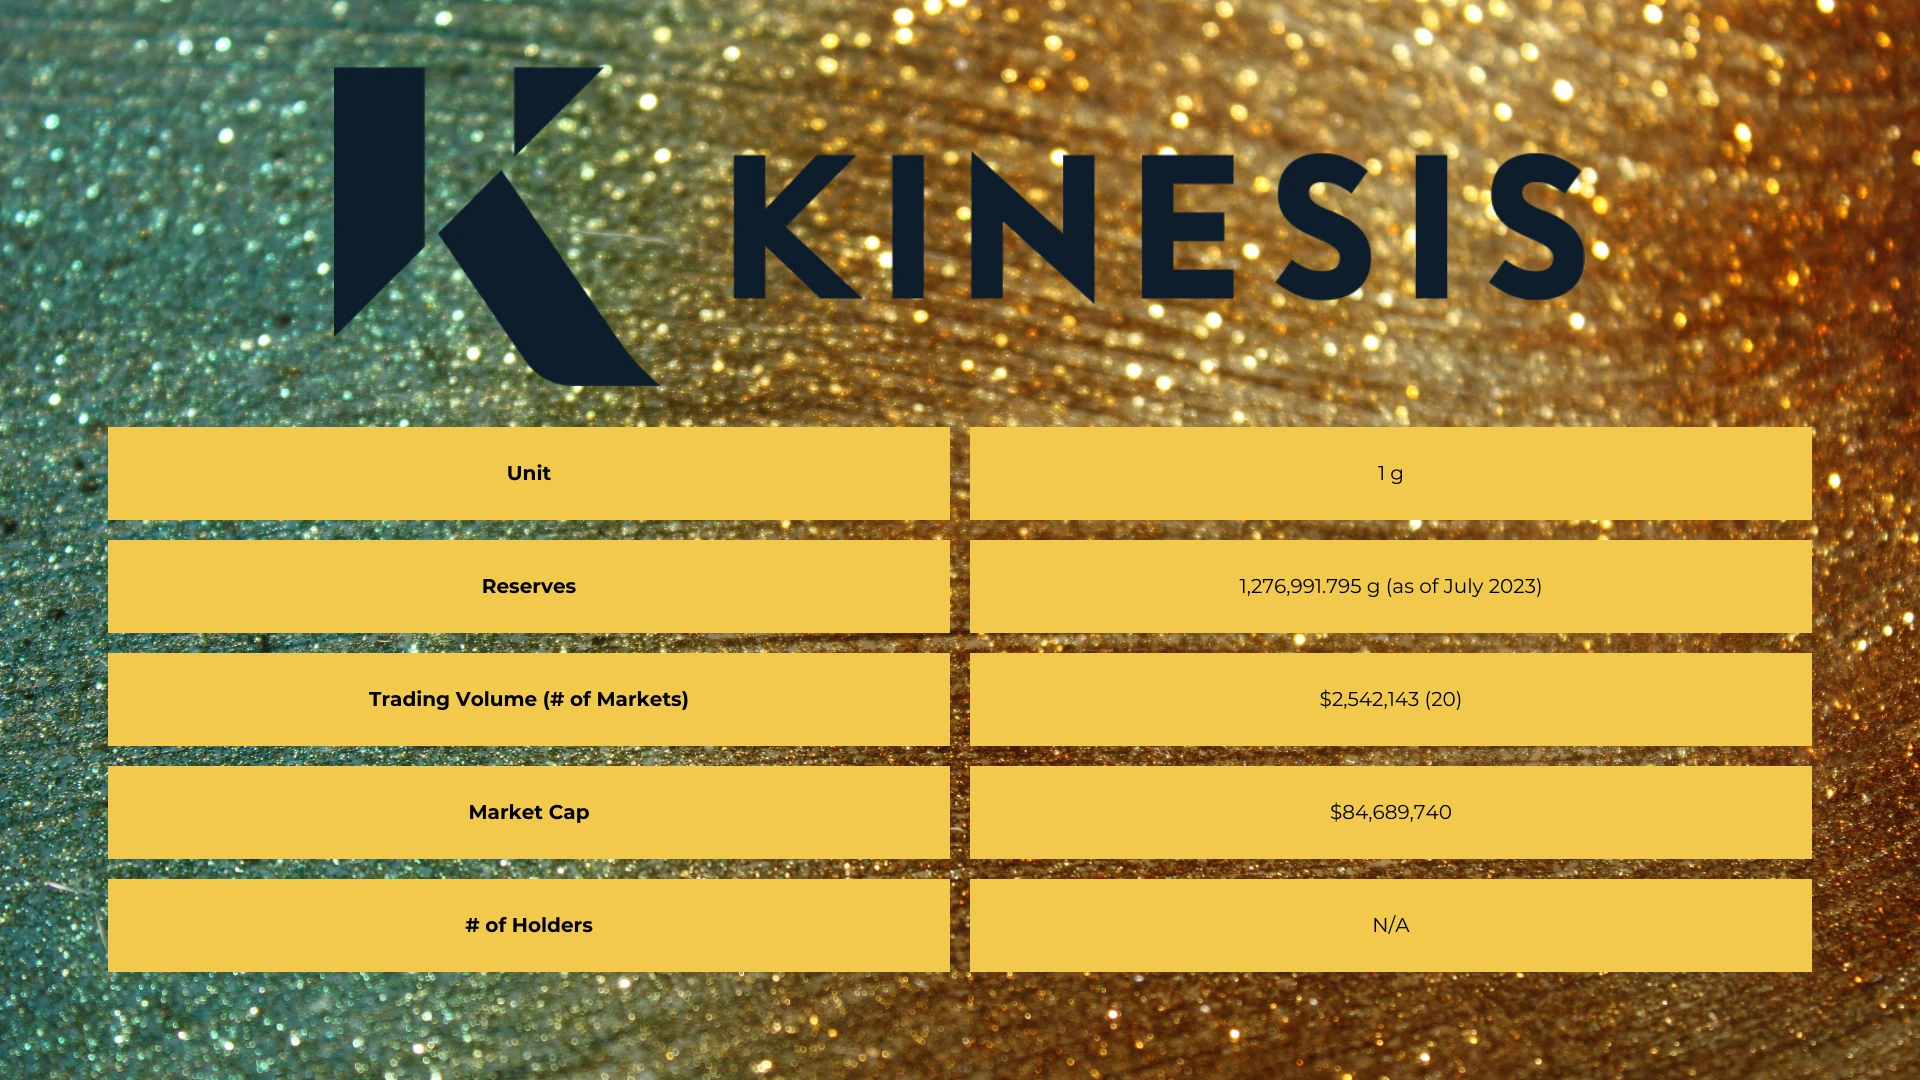 Kinesis Gold in numbers. Unit - 1 g  Reserves - 1,276,991.795 g (as of July 2023)  Trading Volume (# of Markets) - $2,542,143 (20)  Market Cap - $84,689,740  Token Holders - N/A